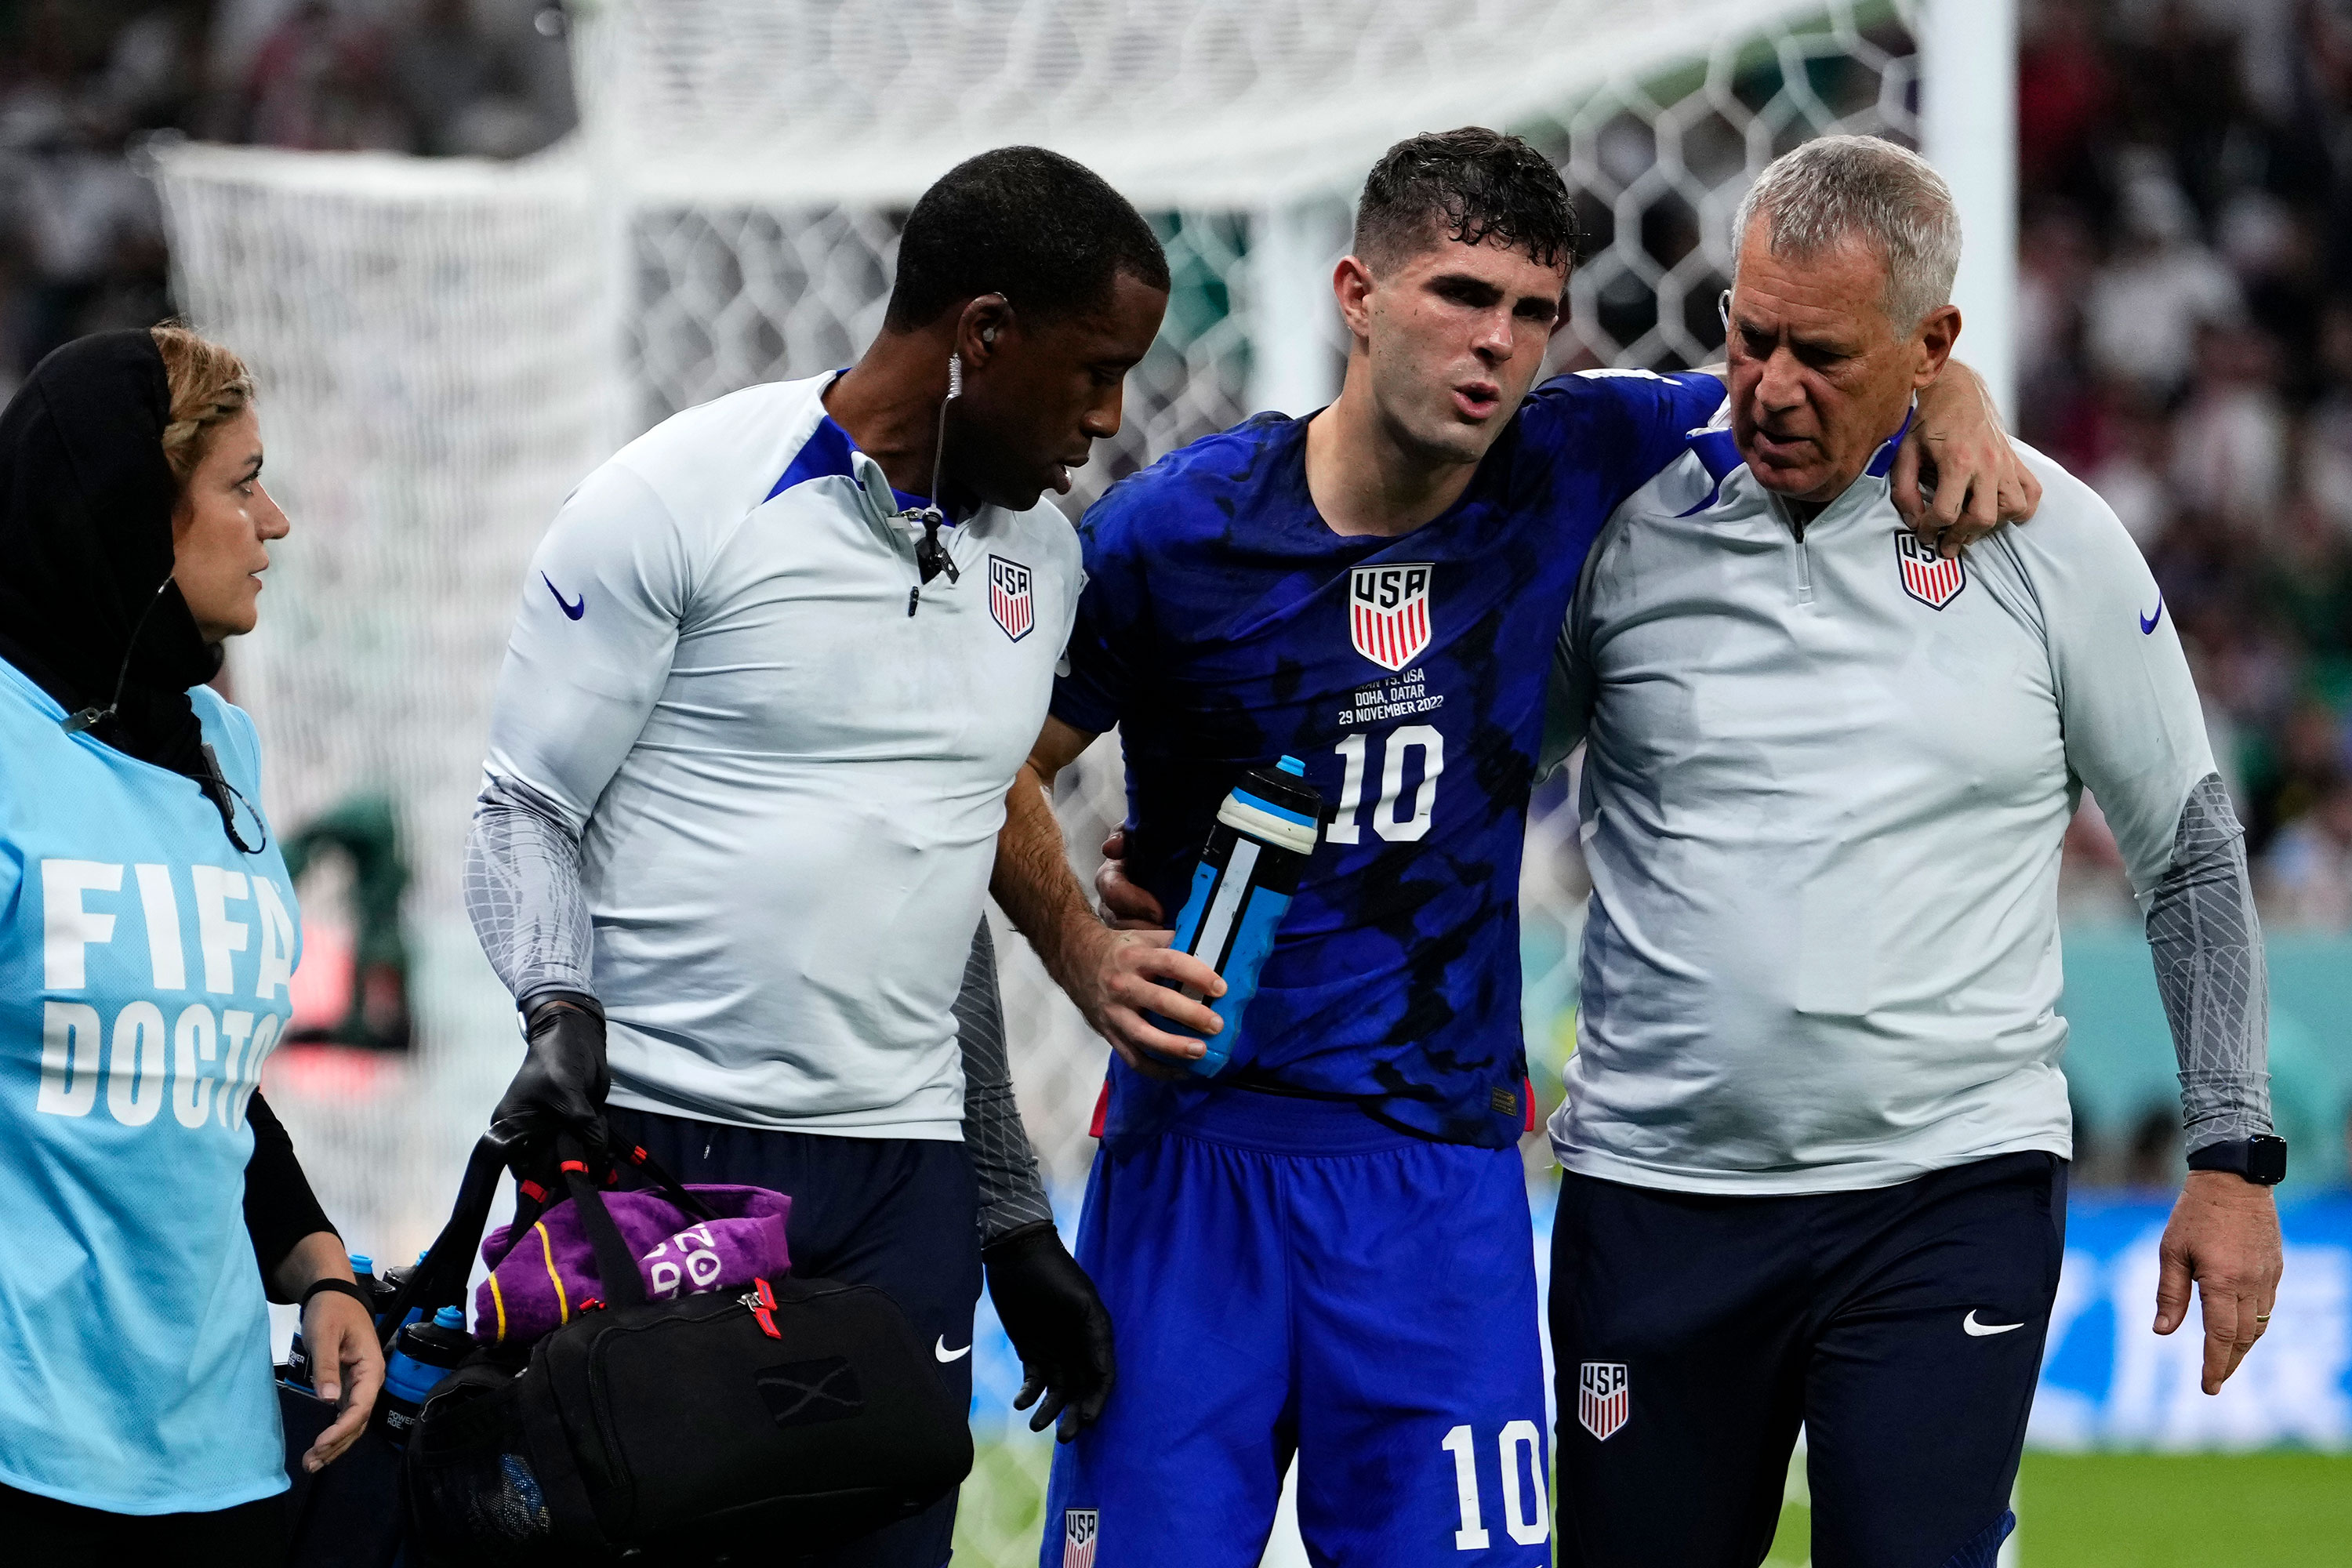 Christian Pulisic of the United States is helped off the pitch after suffering an injury during the match against Iran on Tuesday.